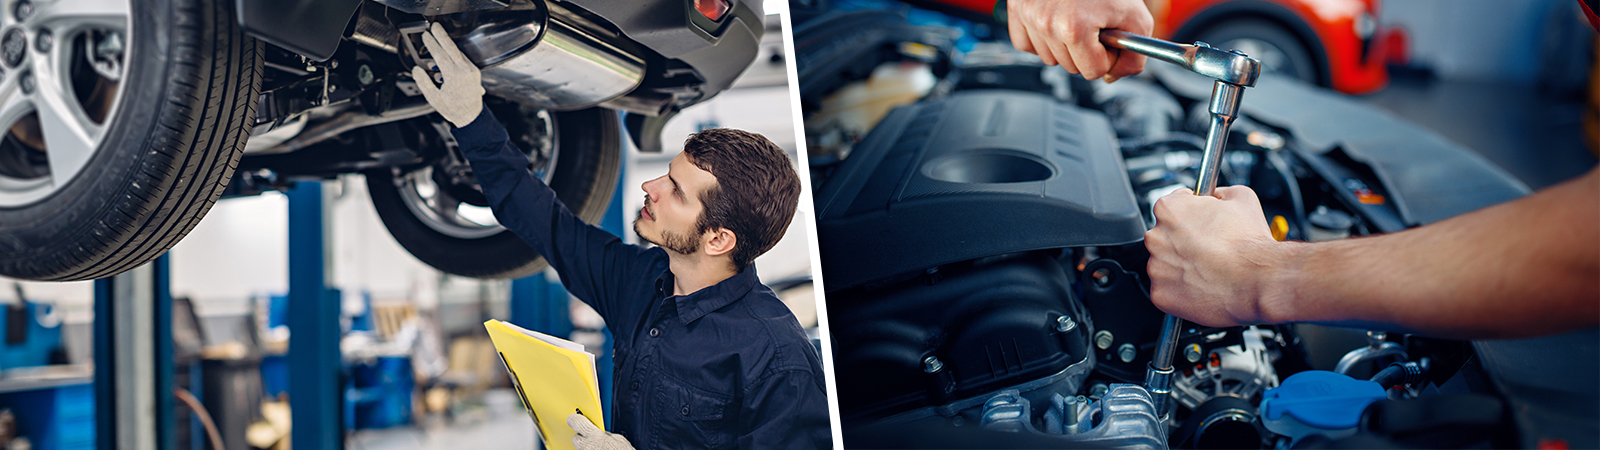 Left to right: Auto car repair service center. Mechanic examining car; Worker disassembles vehicle engine, car service